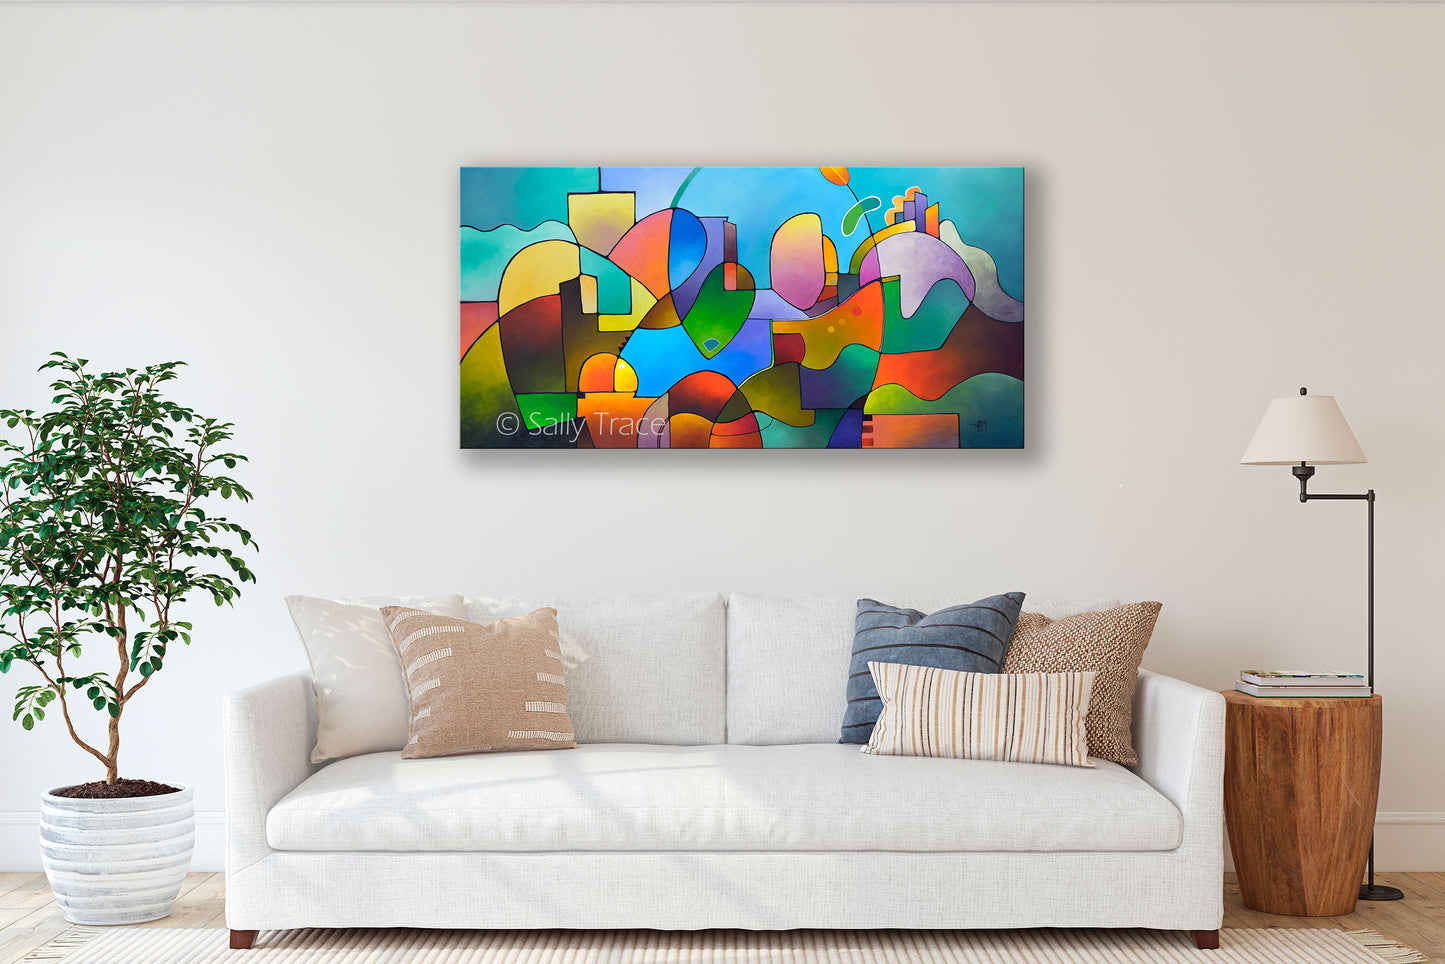 "Diversification" modern geometric abstract landscape painting, abstract paintings for living room, blue and green and earth colors with hard edged geometric shapes, room view